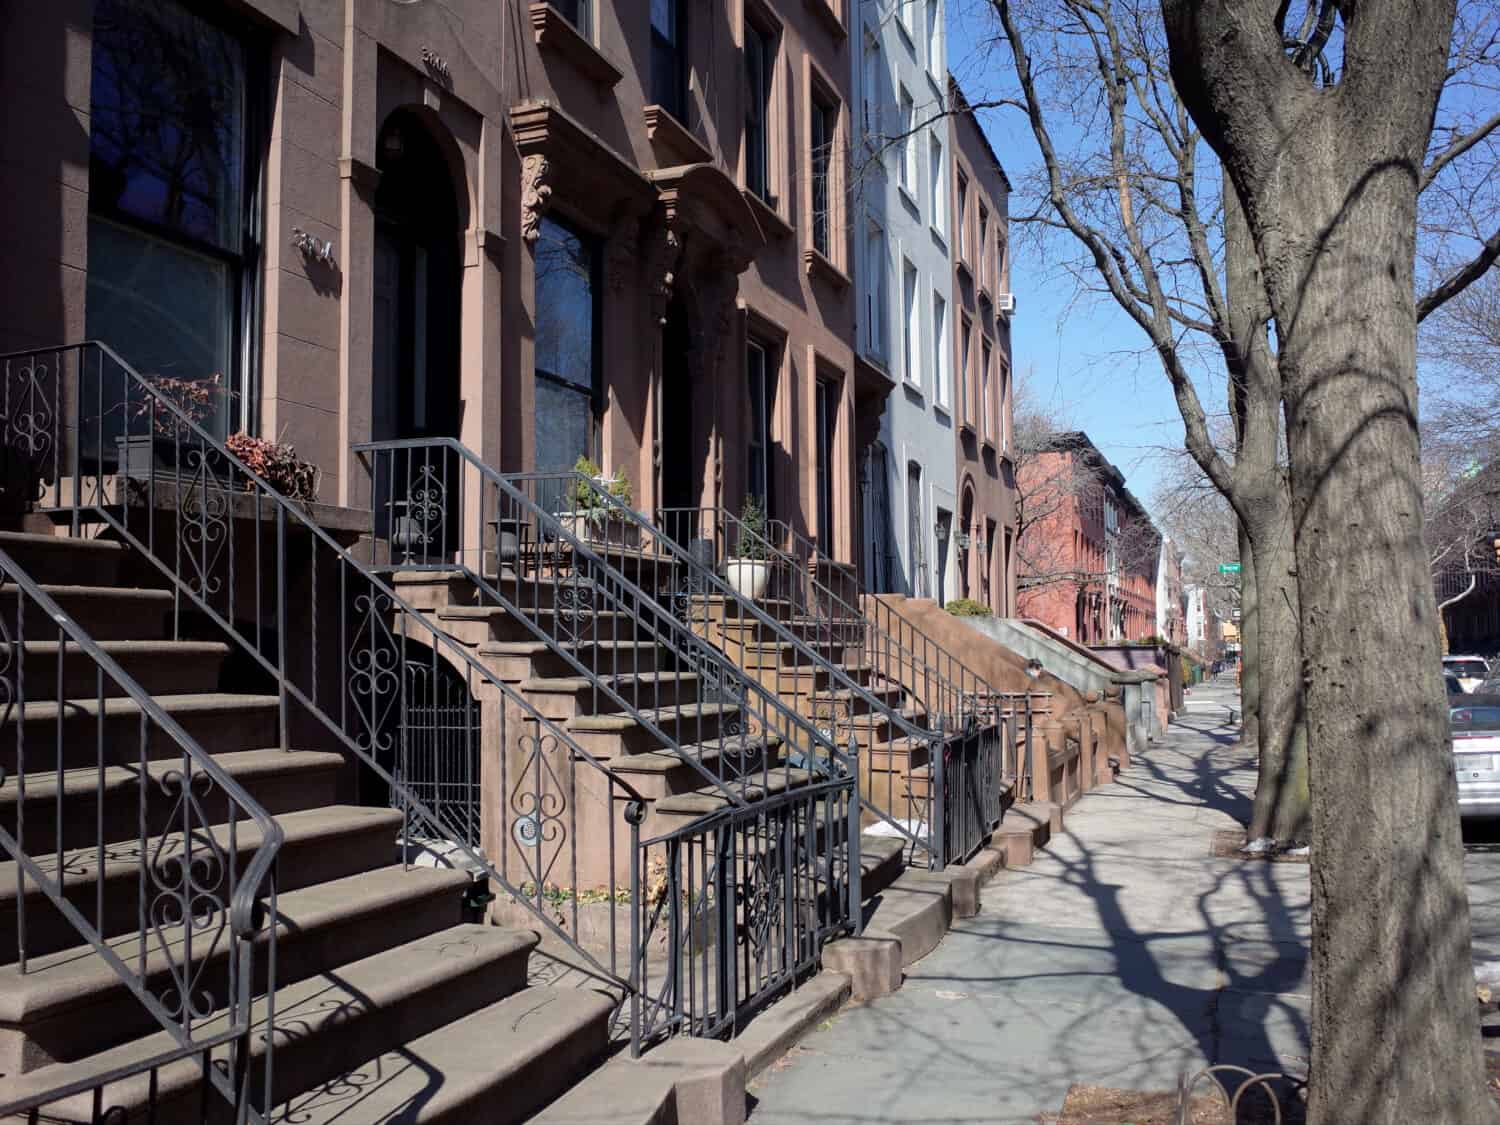 Brownstone houses on a street in the up and coming neighborhood of Cobble Hill, Brooklyn, NYC